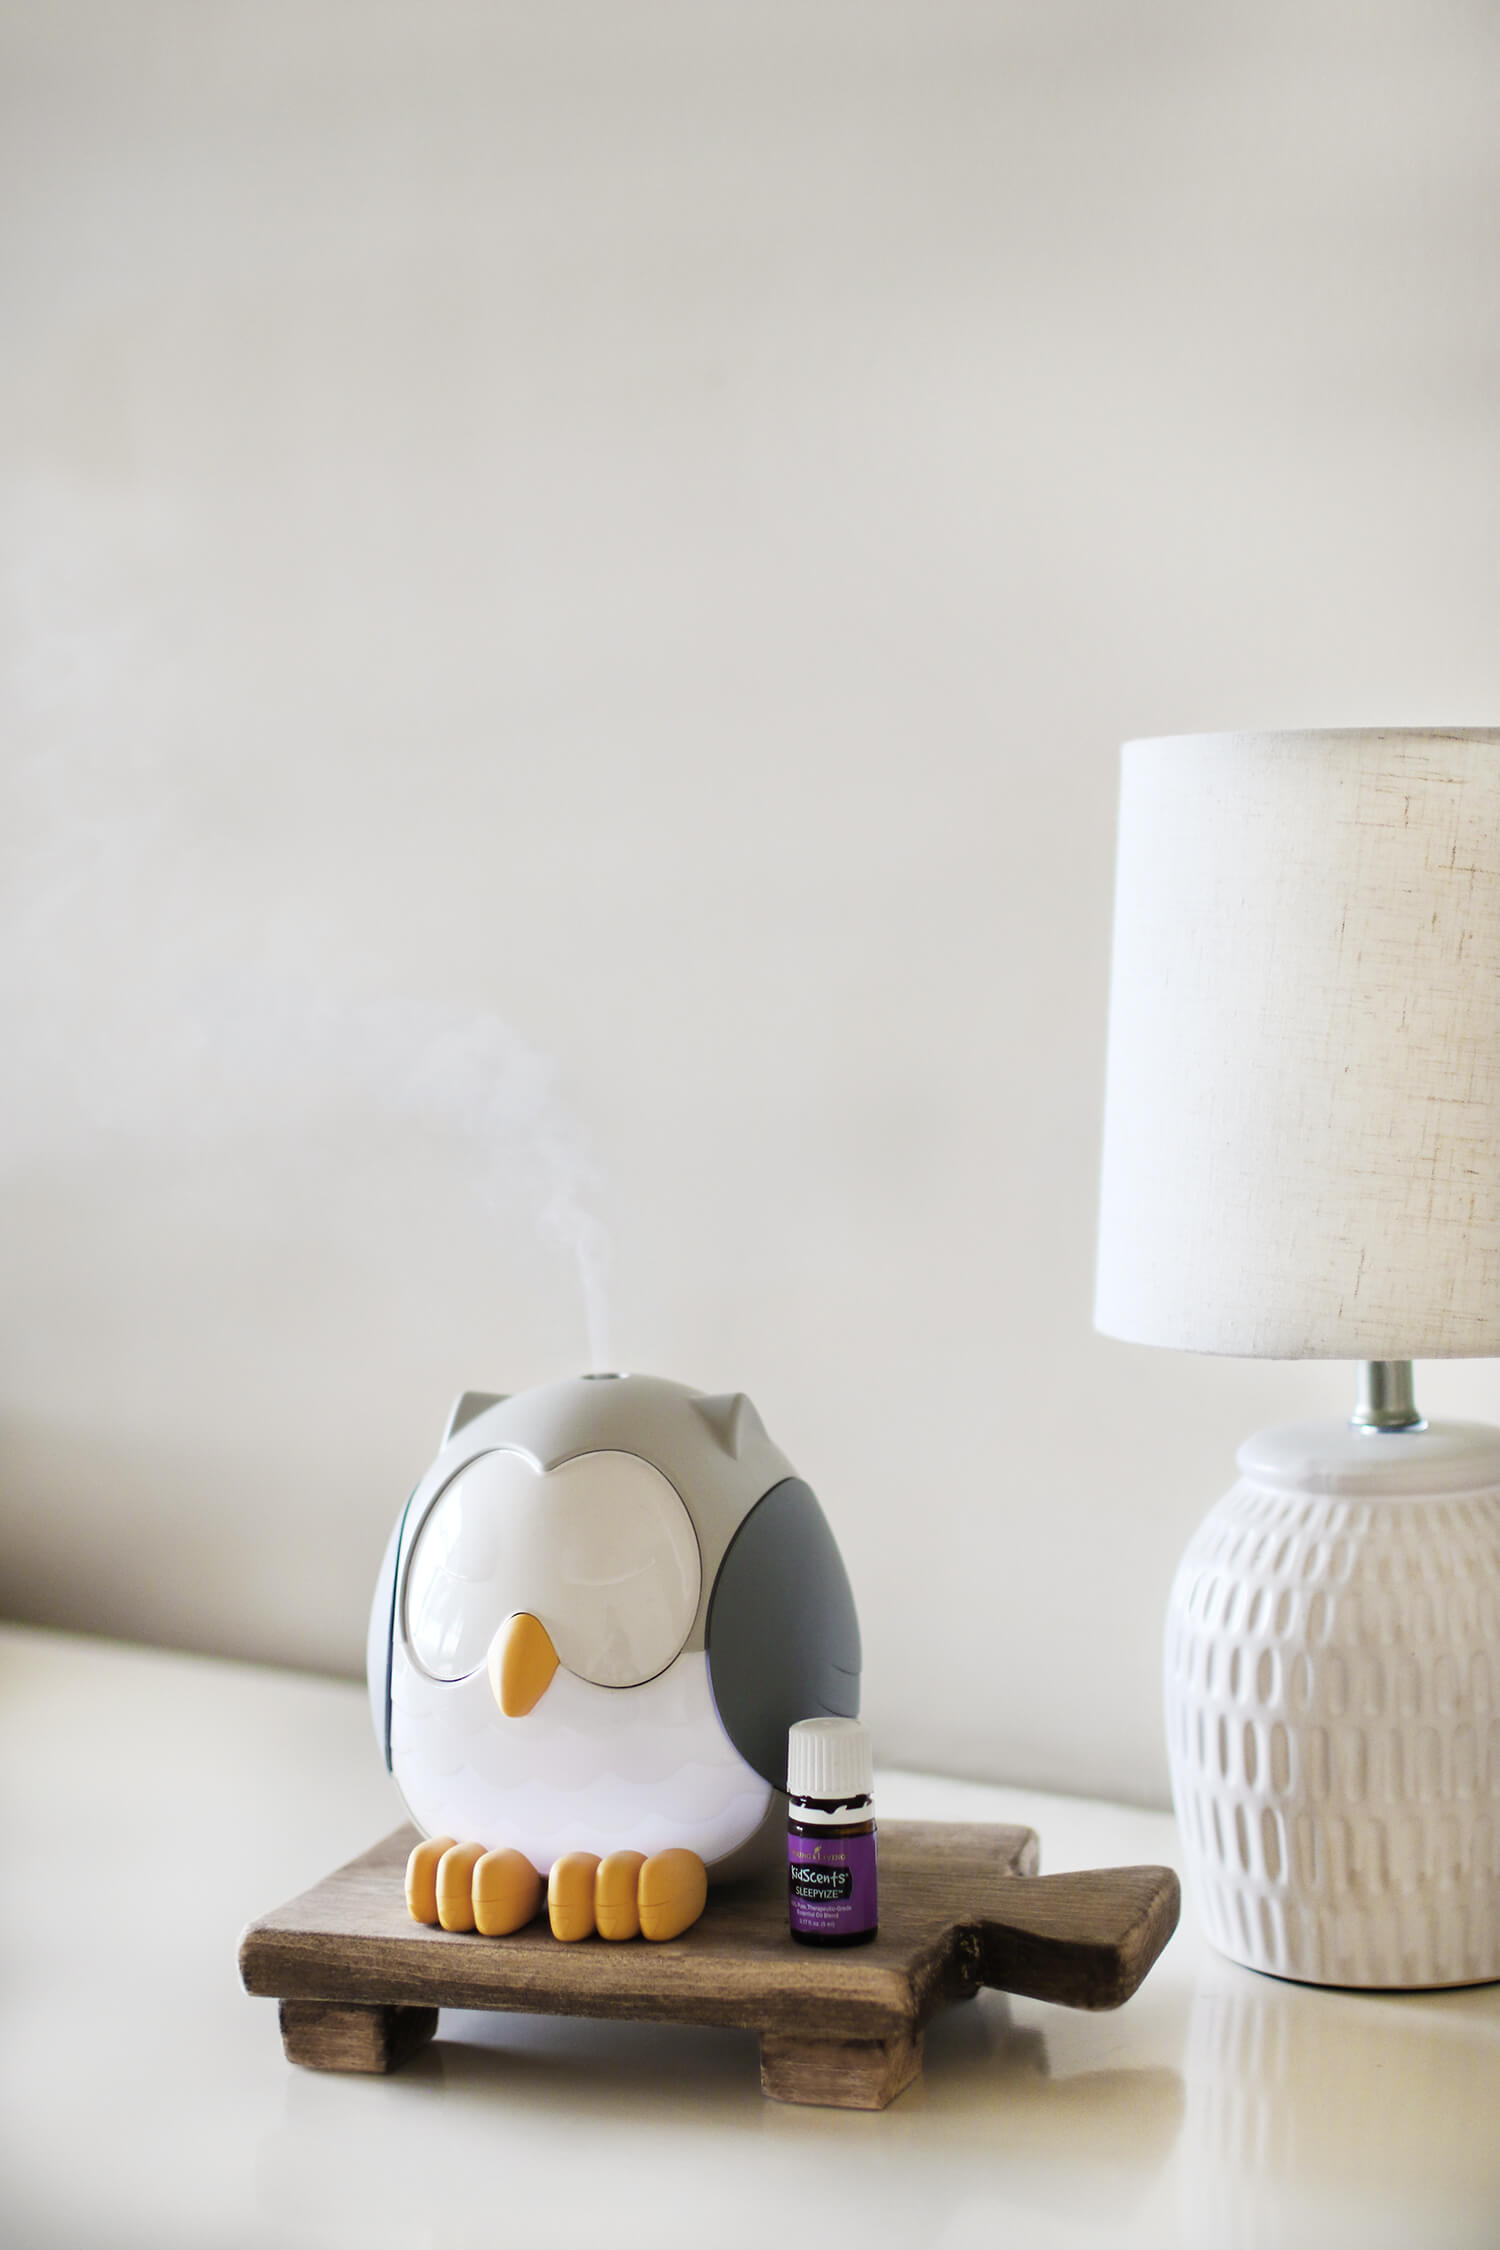 Essential Oils & Kids: What We love in our home and how we are using them. From better sleep to support with feelings of anxiousness and overwhelm. Catch it all on KaraLayne.com!